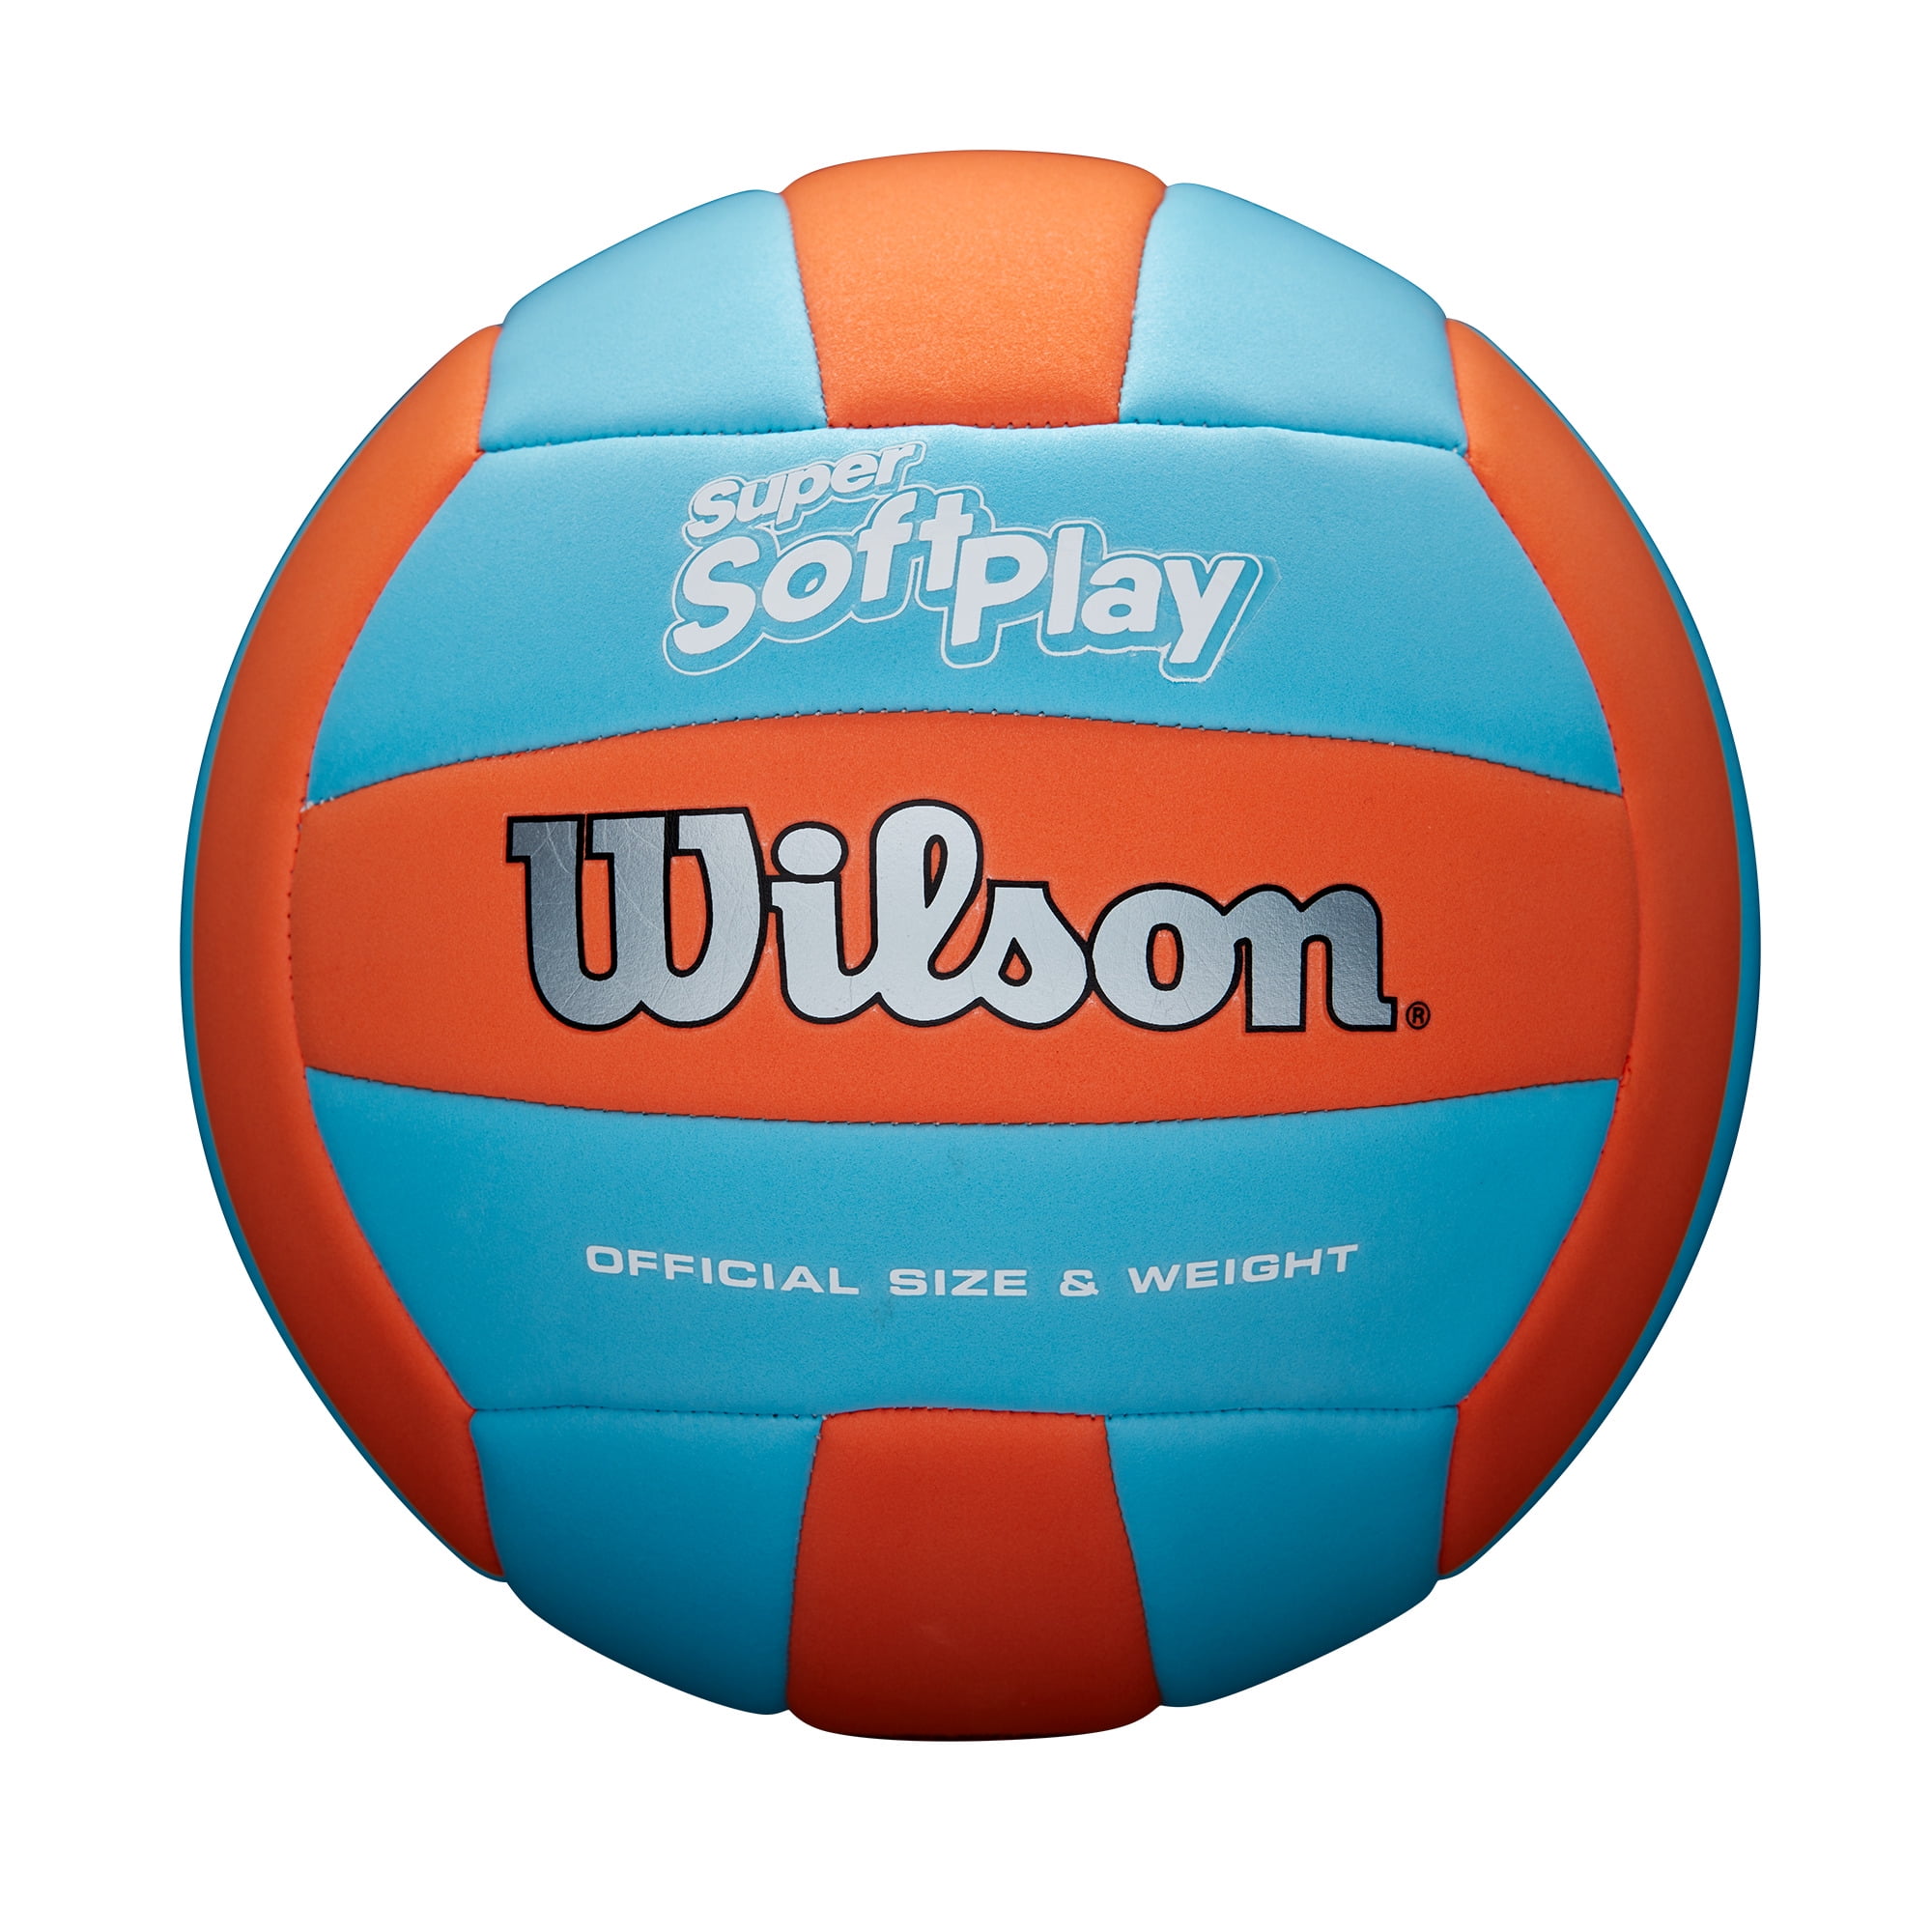 Blue Sports " Outdoors Team & Fitness Outdoor Soft Play Volleyball 